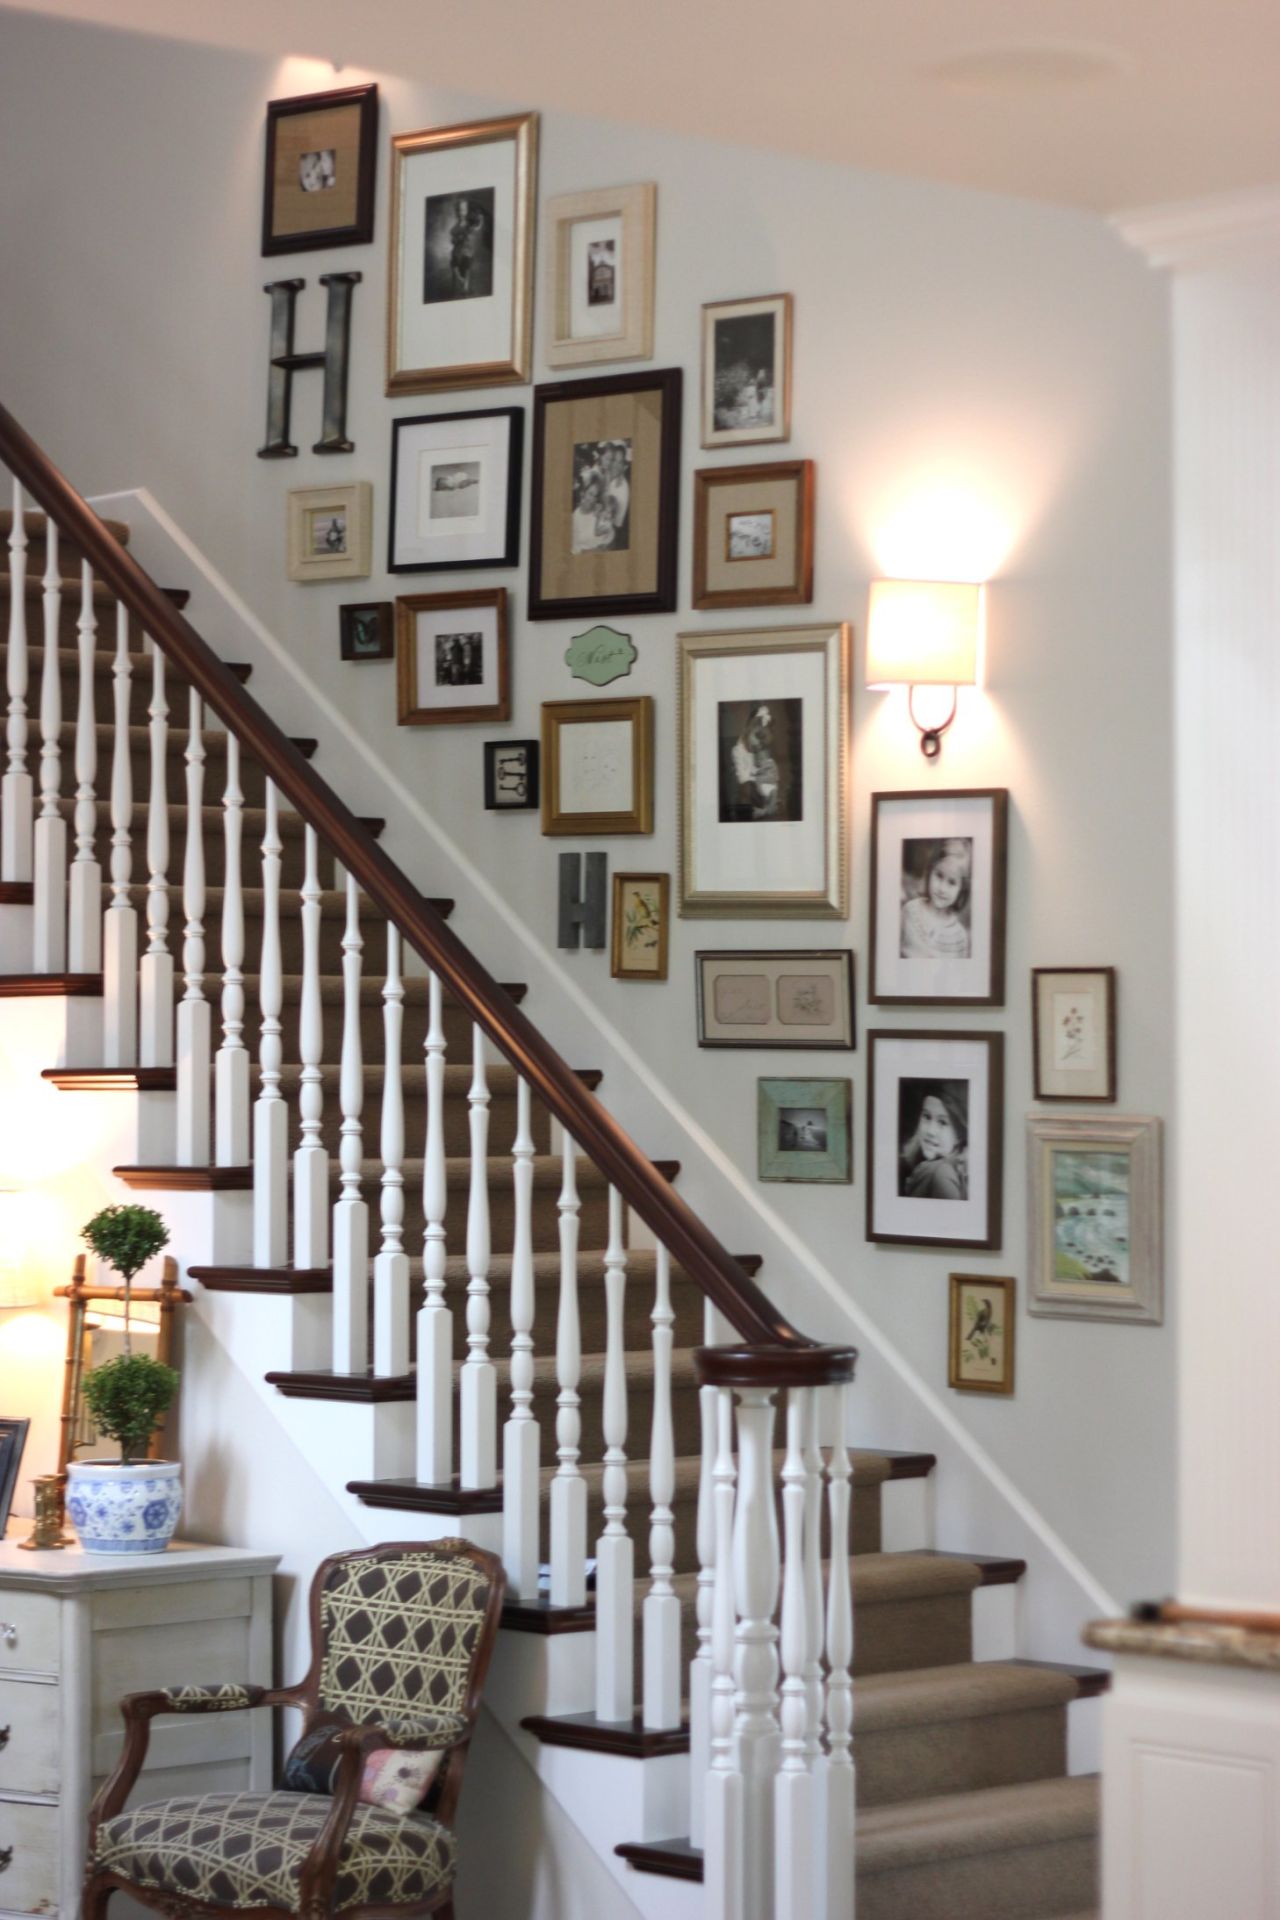 <a href="http://ireport.cnn.com/docs/DOC-992265">Jill Hinson's</a> Portland, Oregon, house wasn't a home until she installed this gallery on the stairwell wall. 